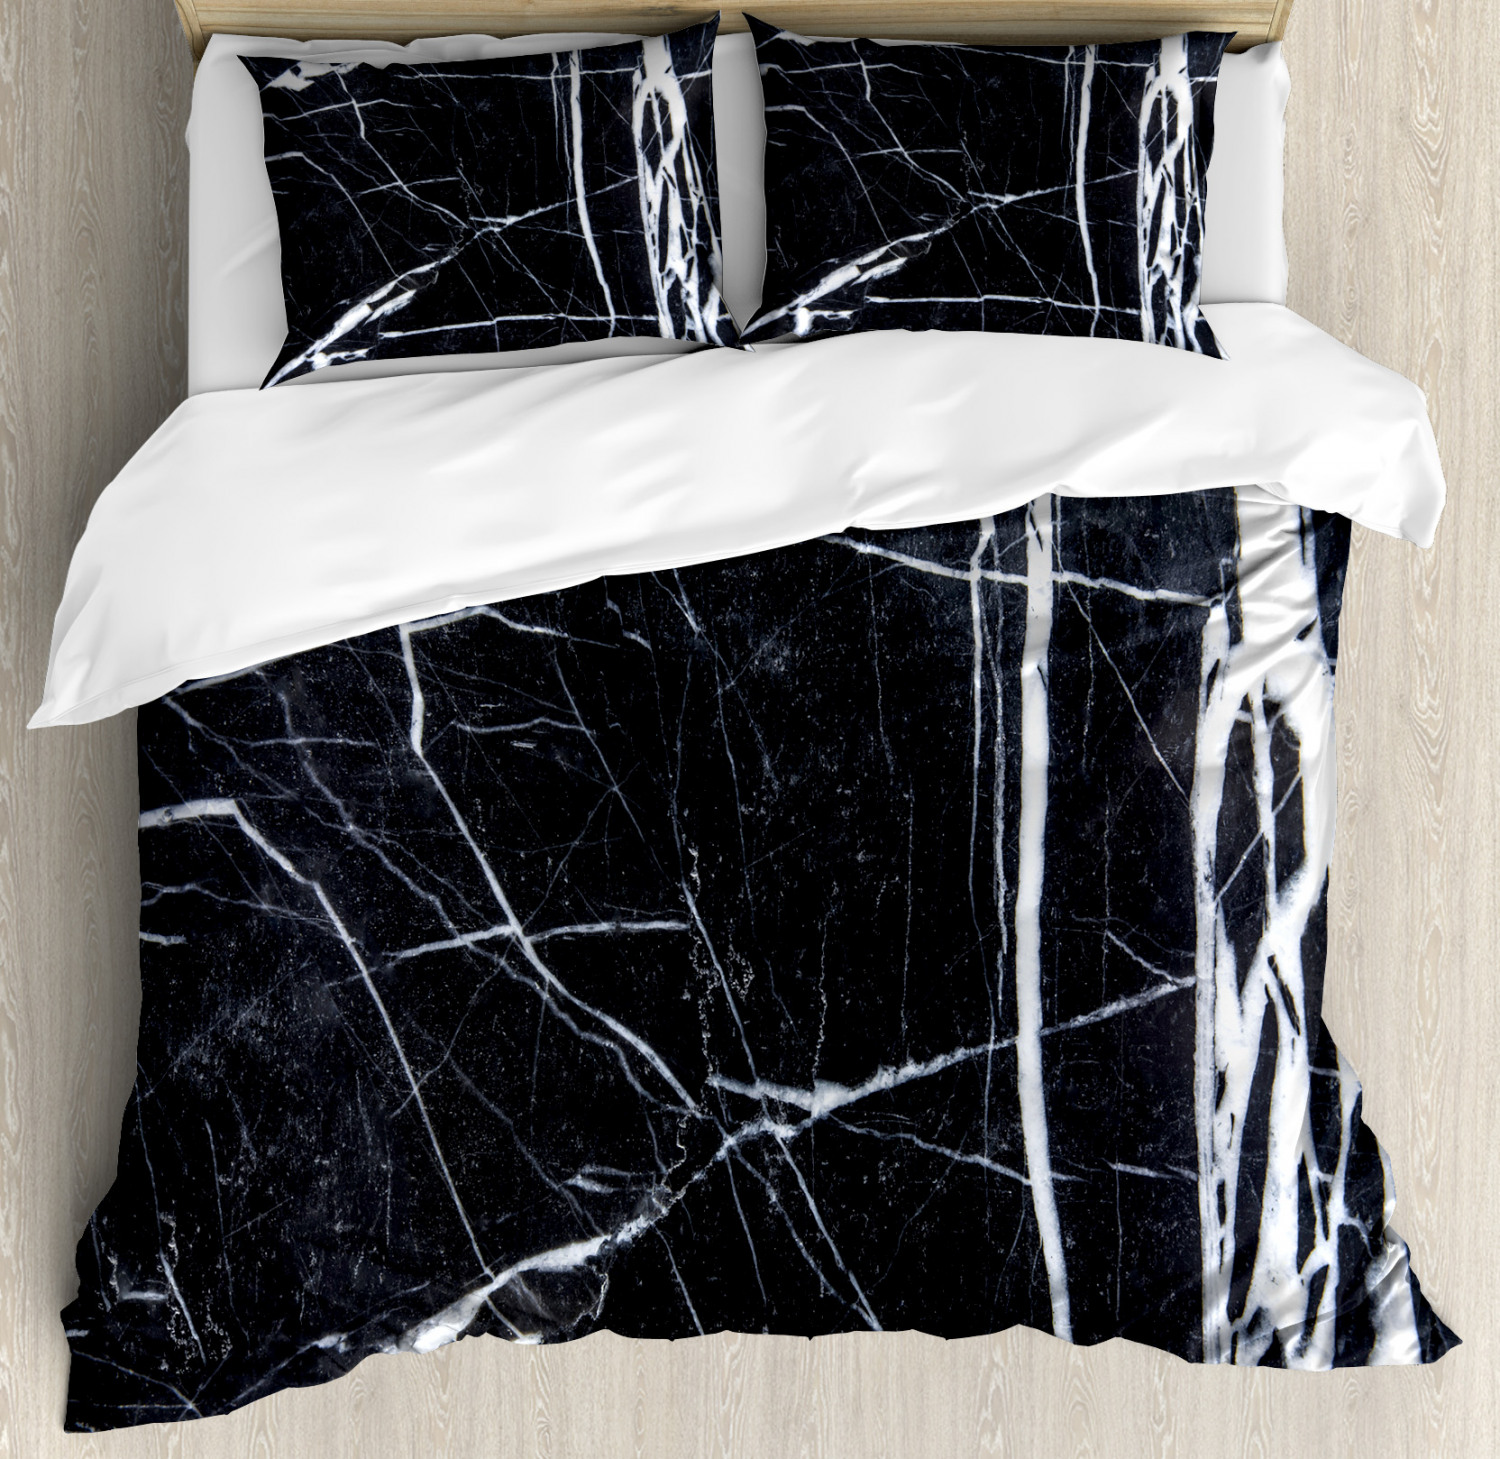 Marble Duvet Cover Set with Pillow Shams Grunge Natural Ston